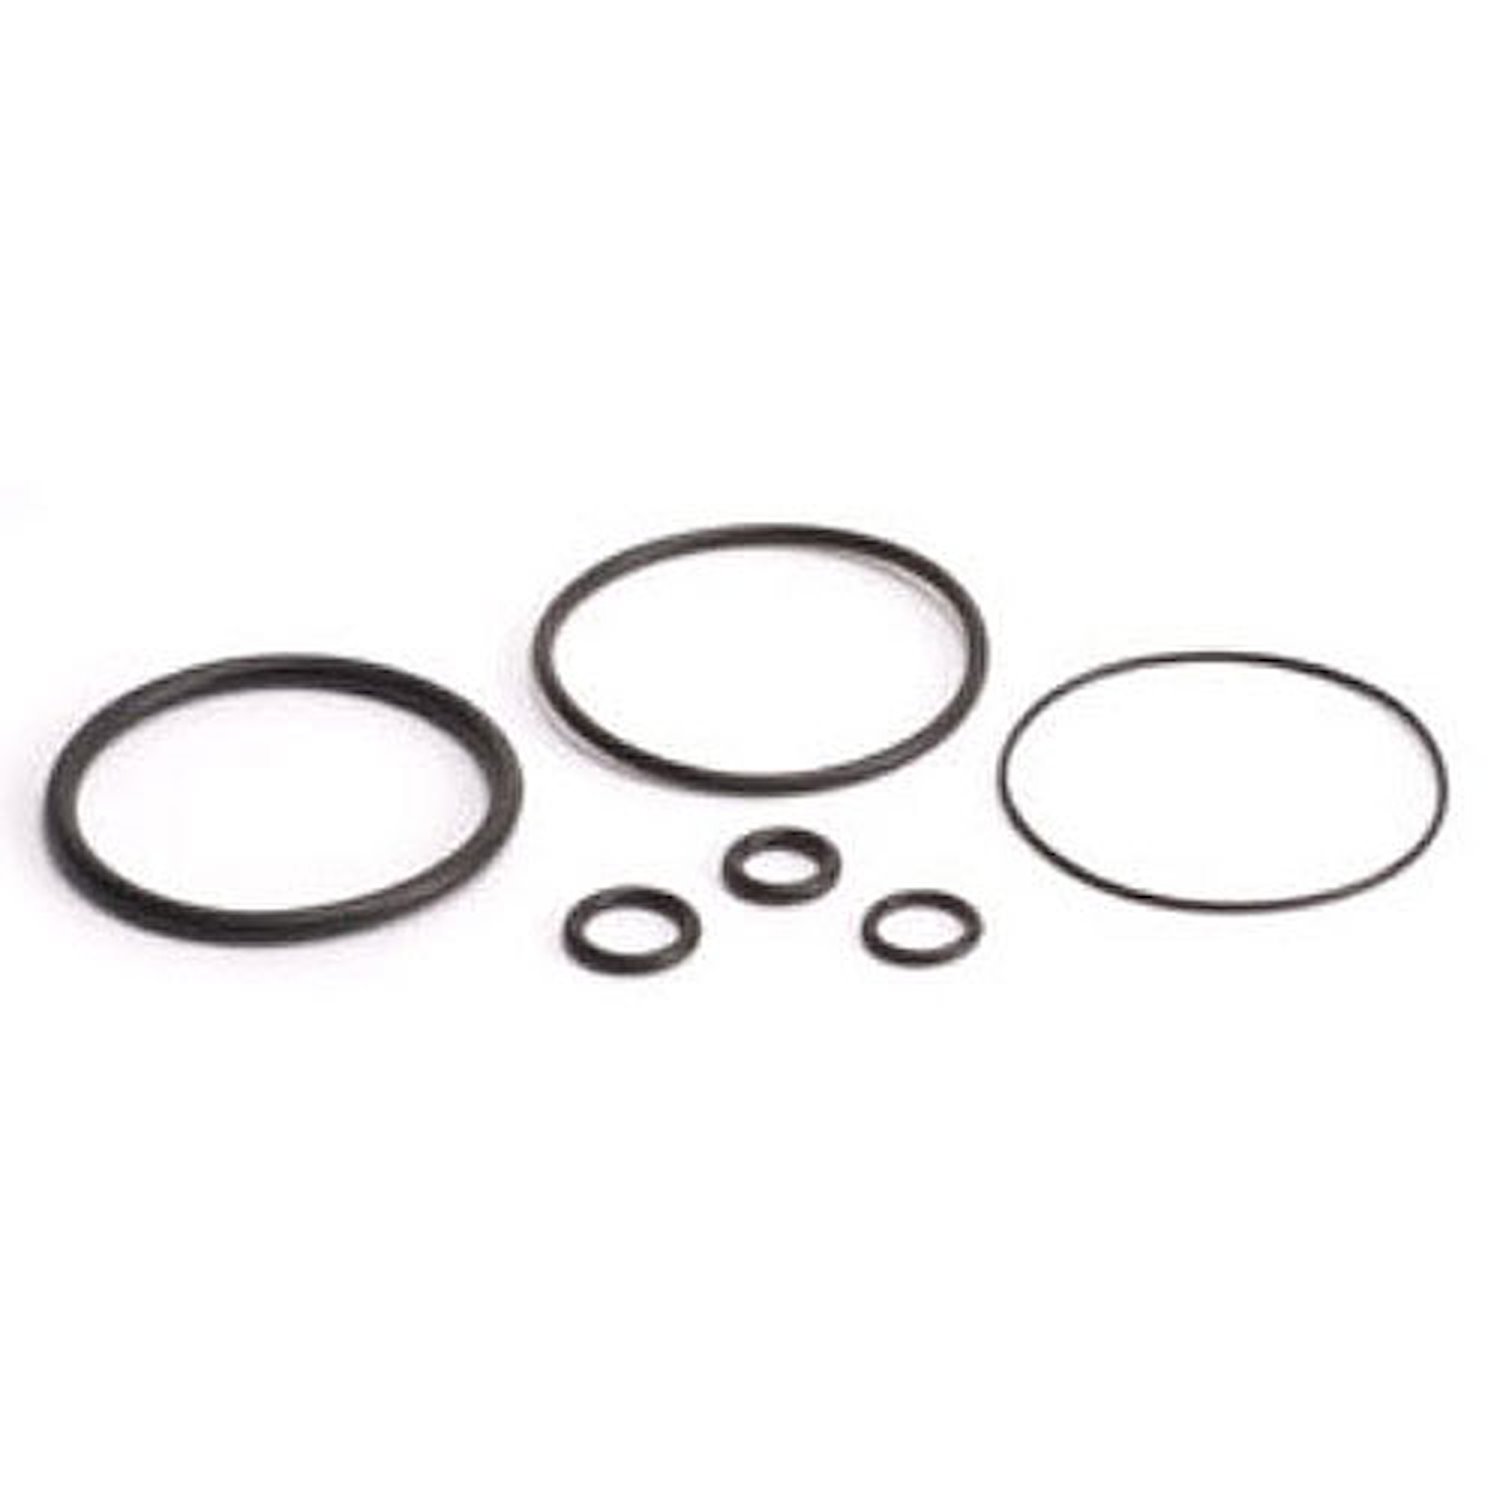 Blow-Off Valve O-Ring Service Kit Fits Plumb Back, Dual Port and Supersonic BOVs